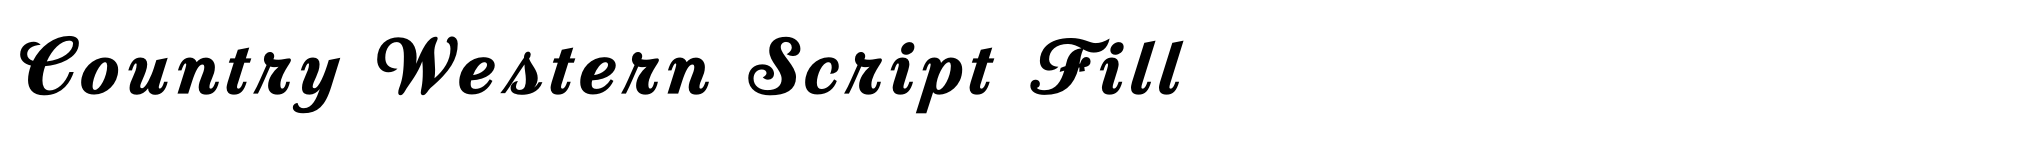 Country Western Script Fill image